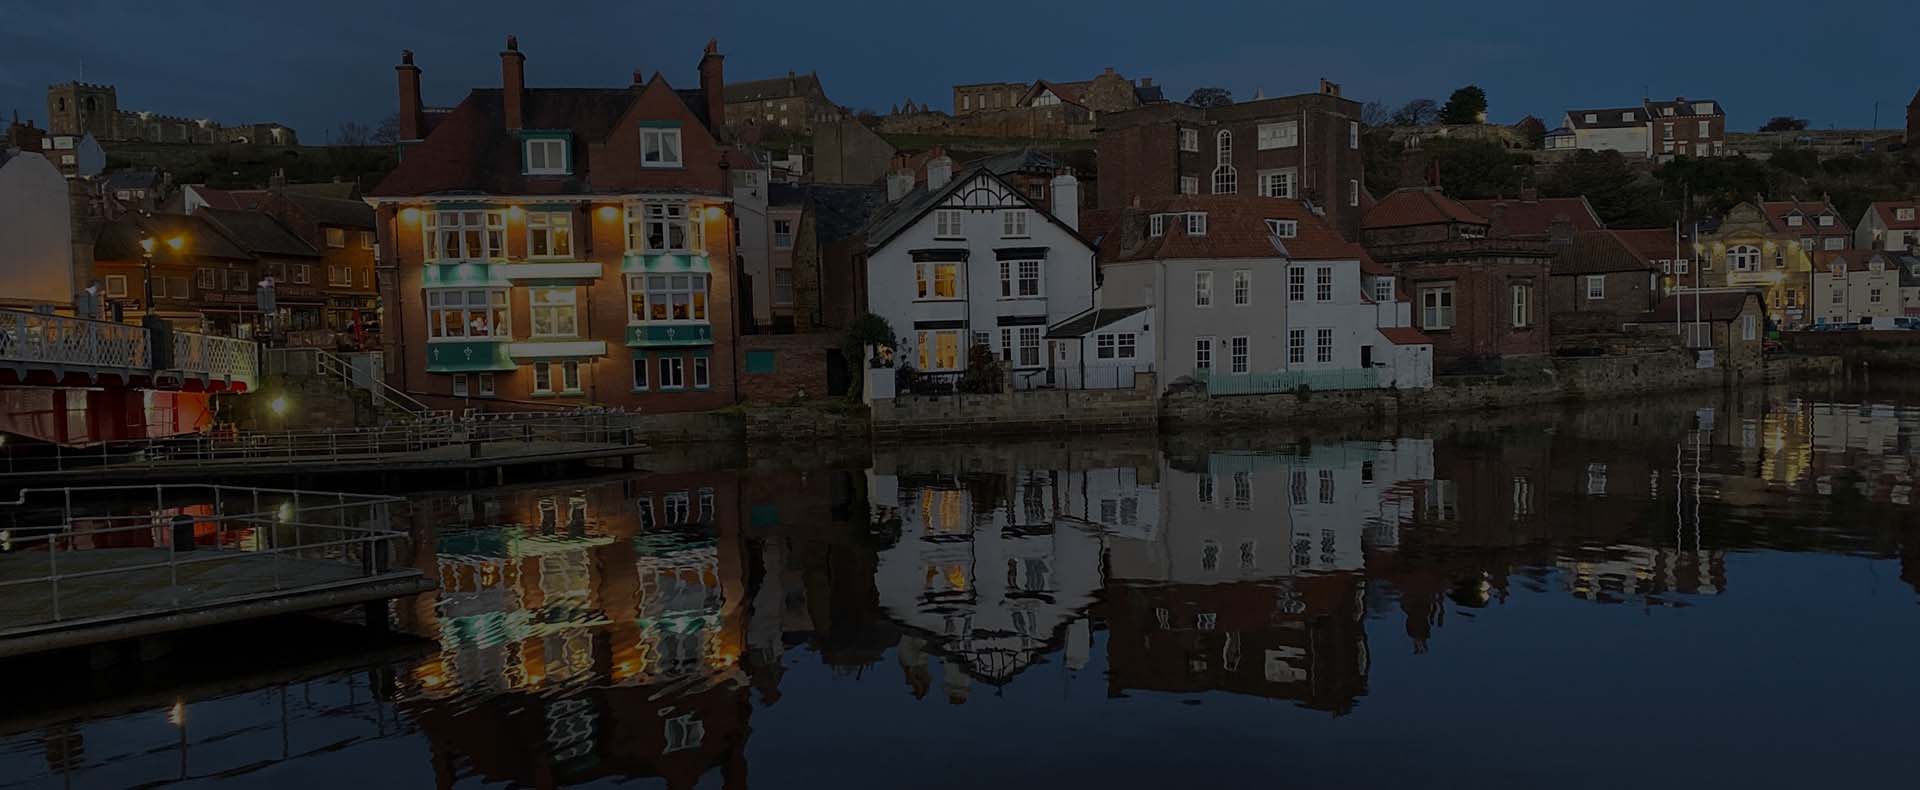 houses by the river esk in whitby at night with a bridge to the left